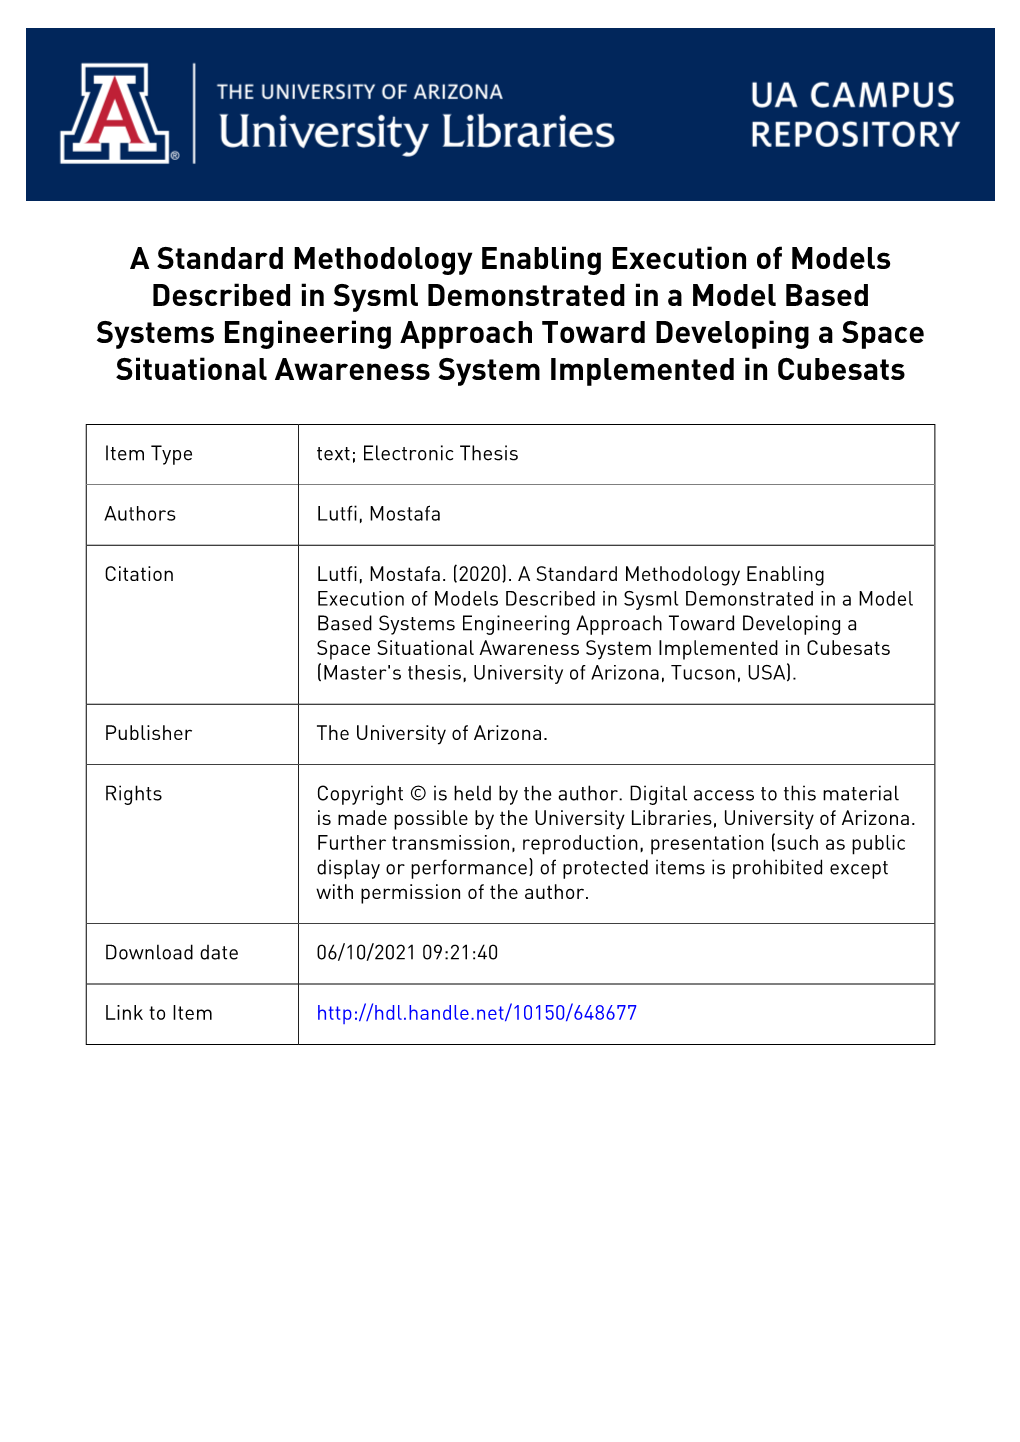 A Standard Methodology Enabling Execution of Models Described in Sysml Demonstrated in a Model Based Systems Engineering Approac